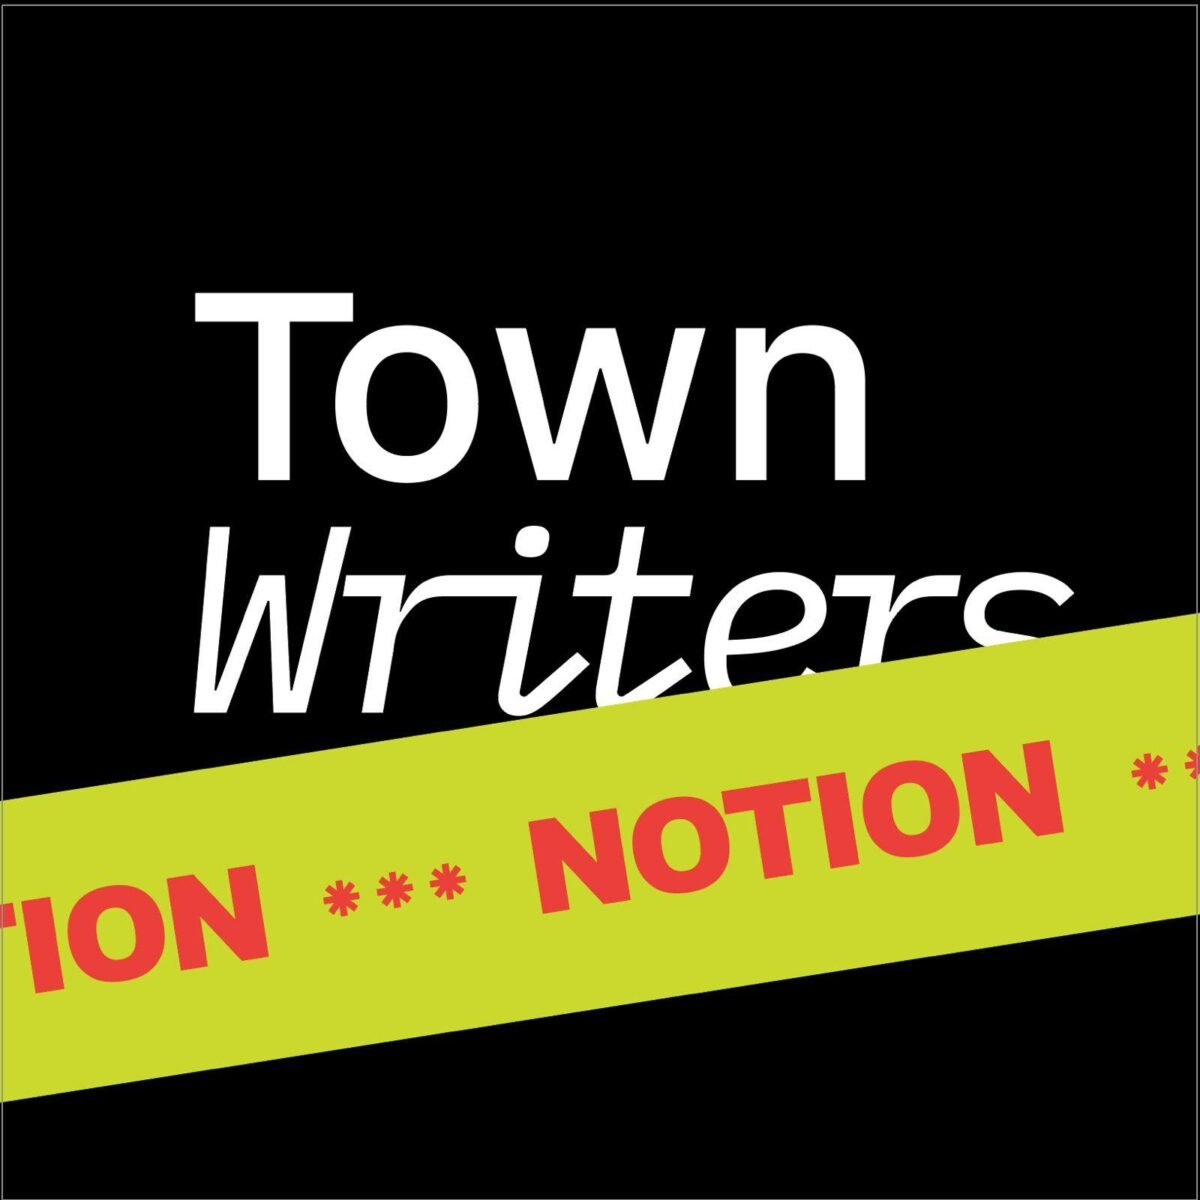 Notion New Cairo – Town writers